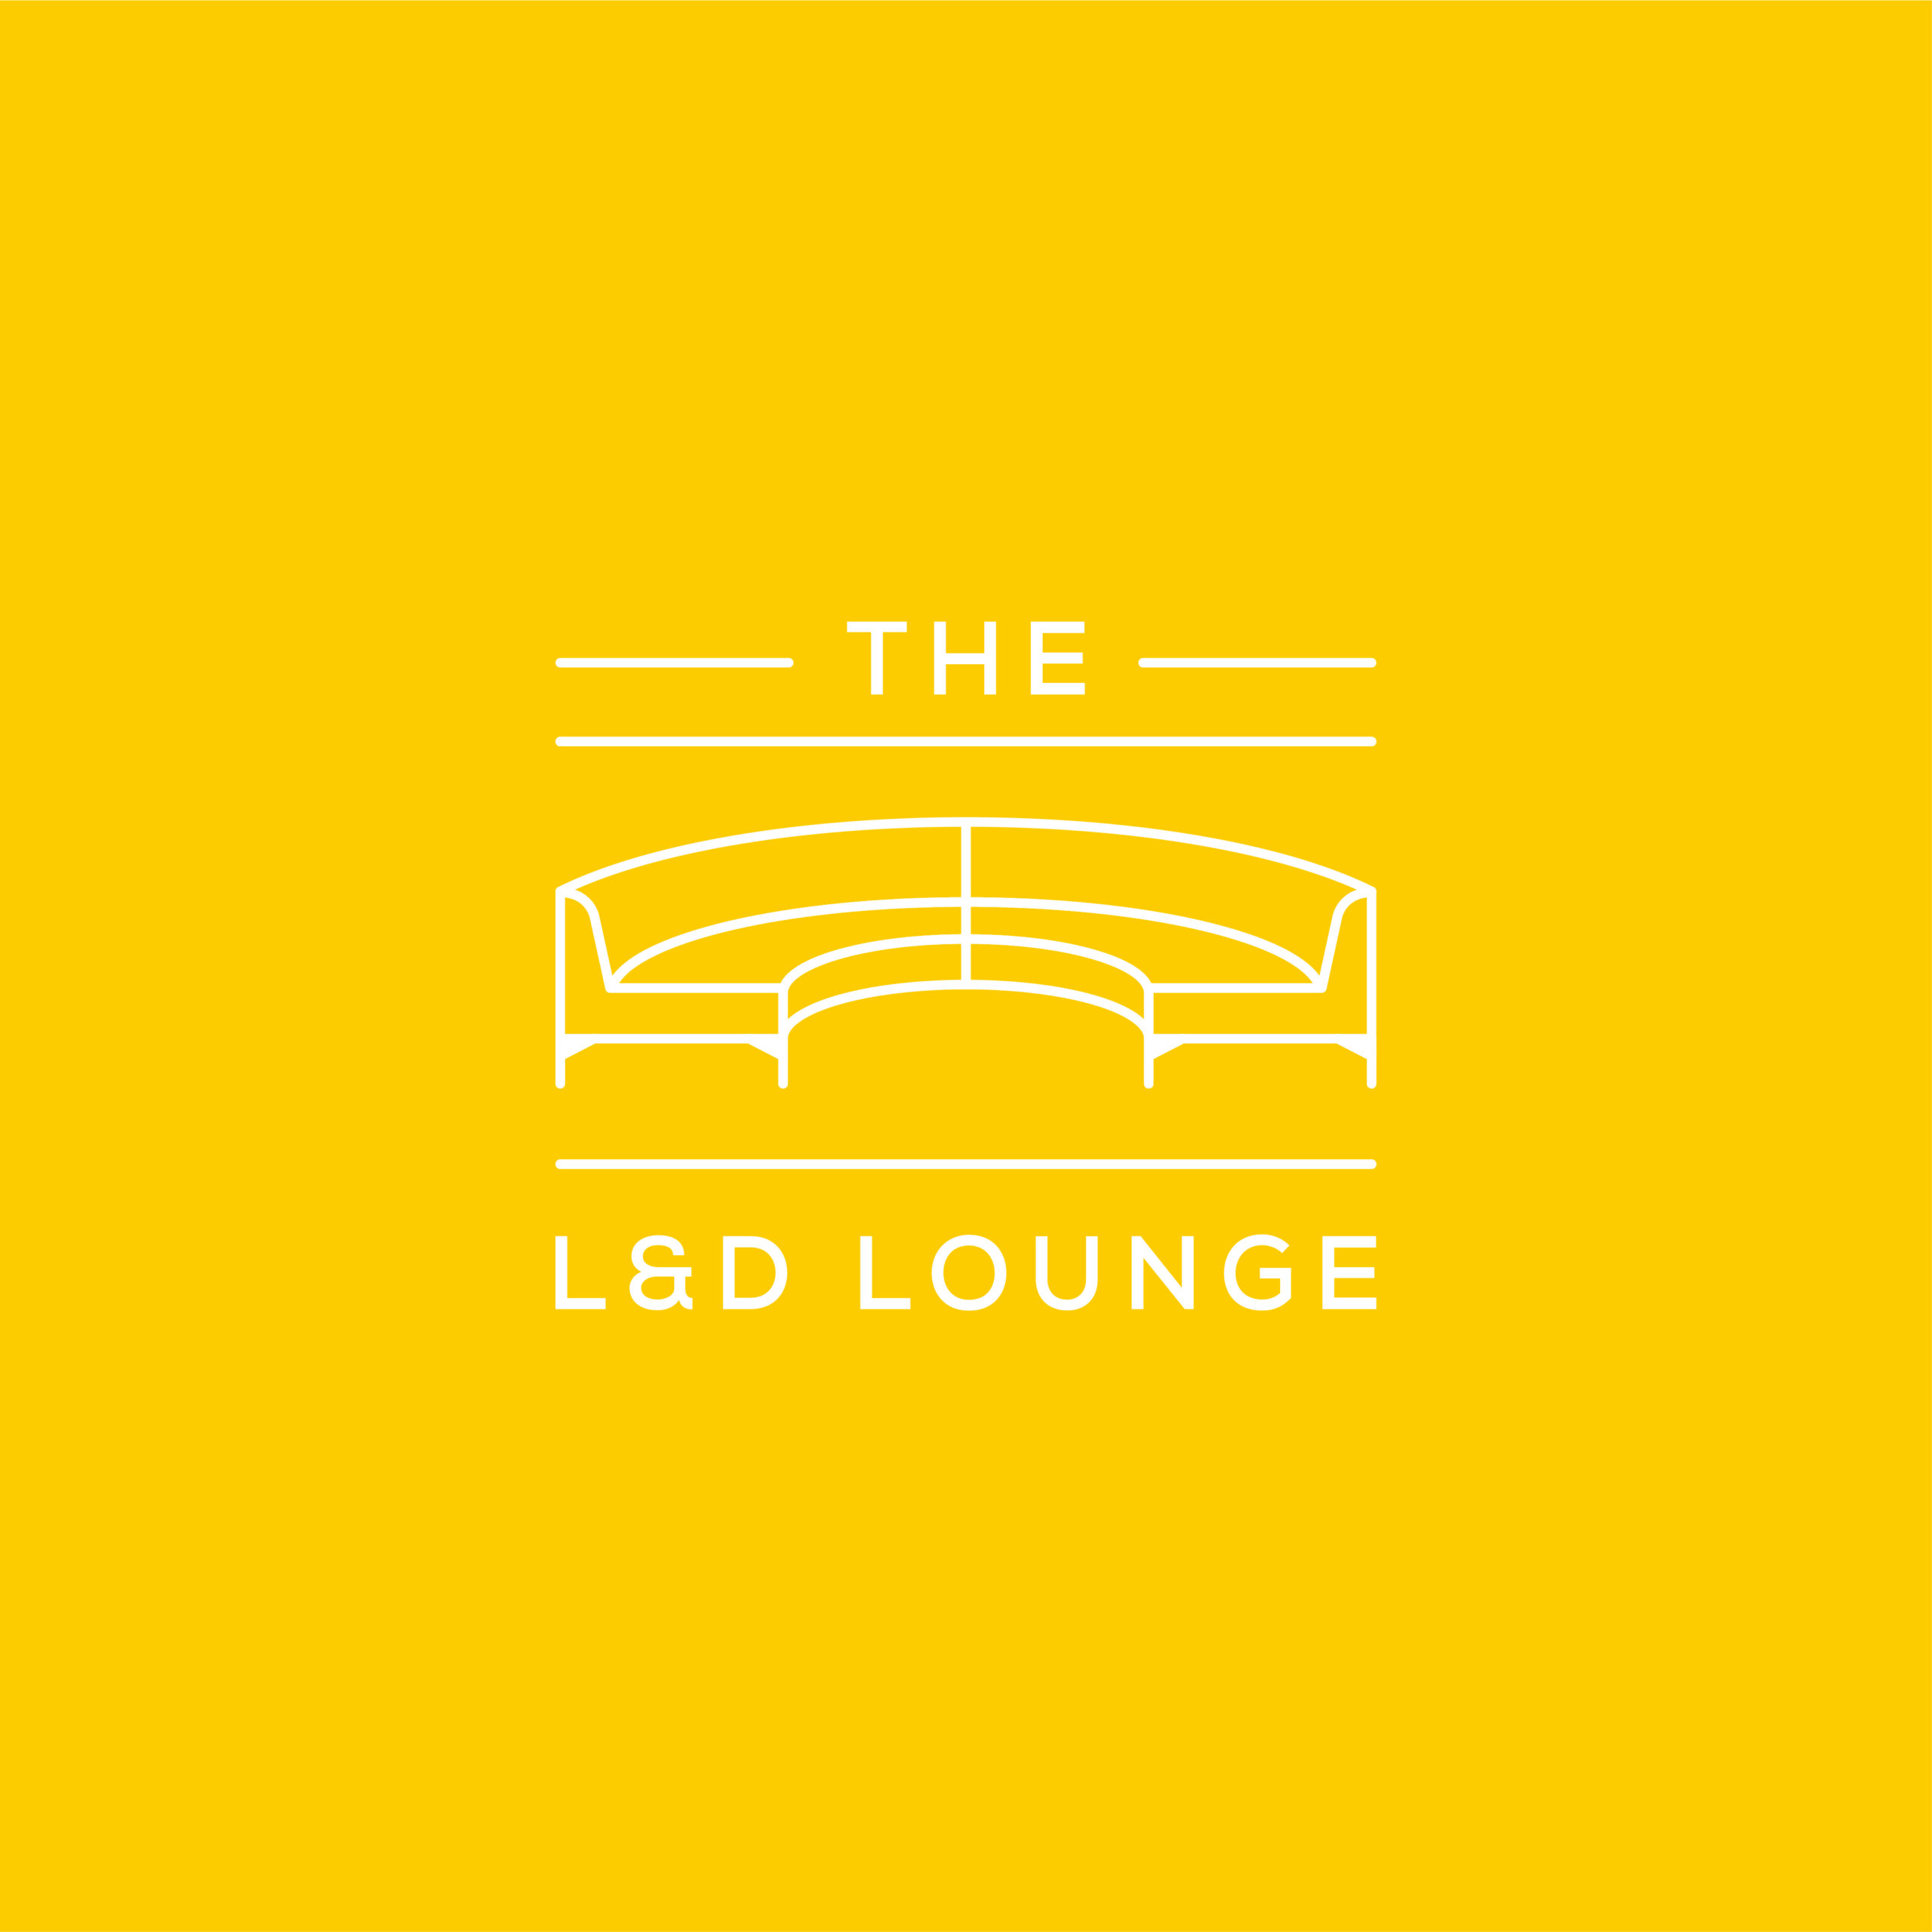 Logo of The L&D Lounge